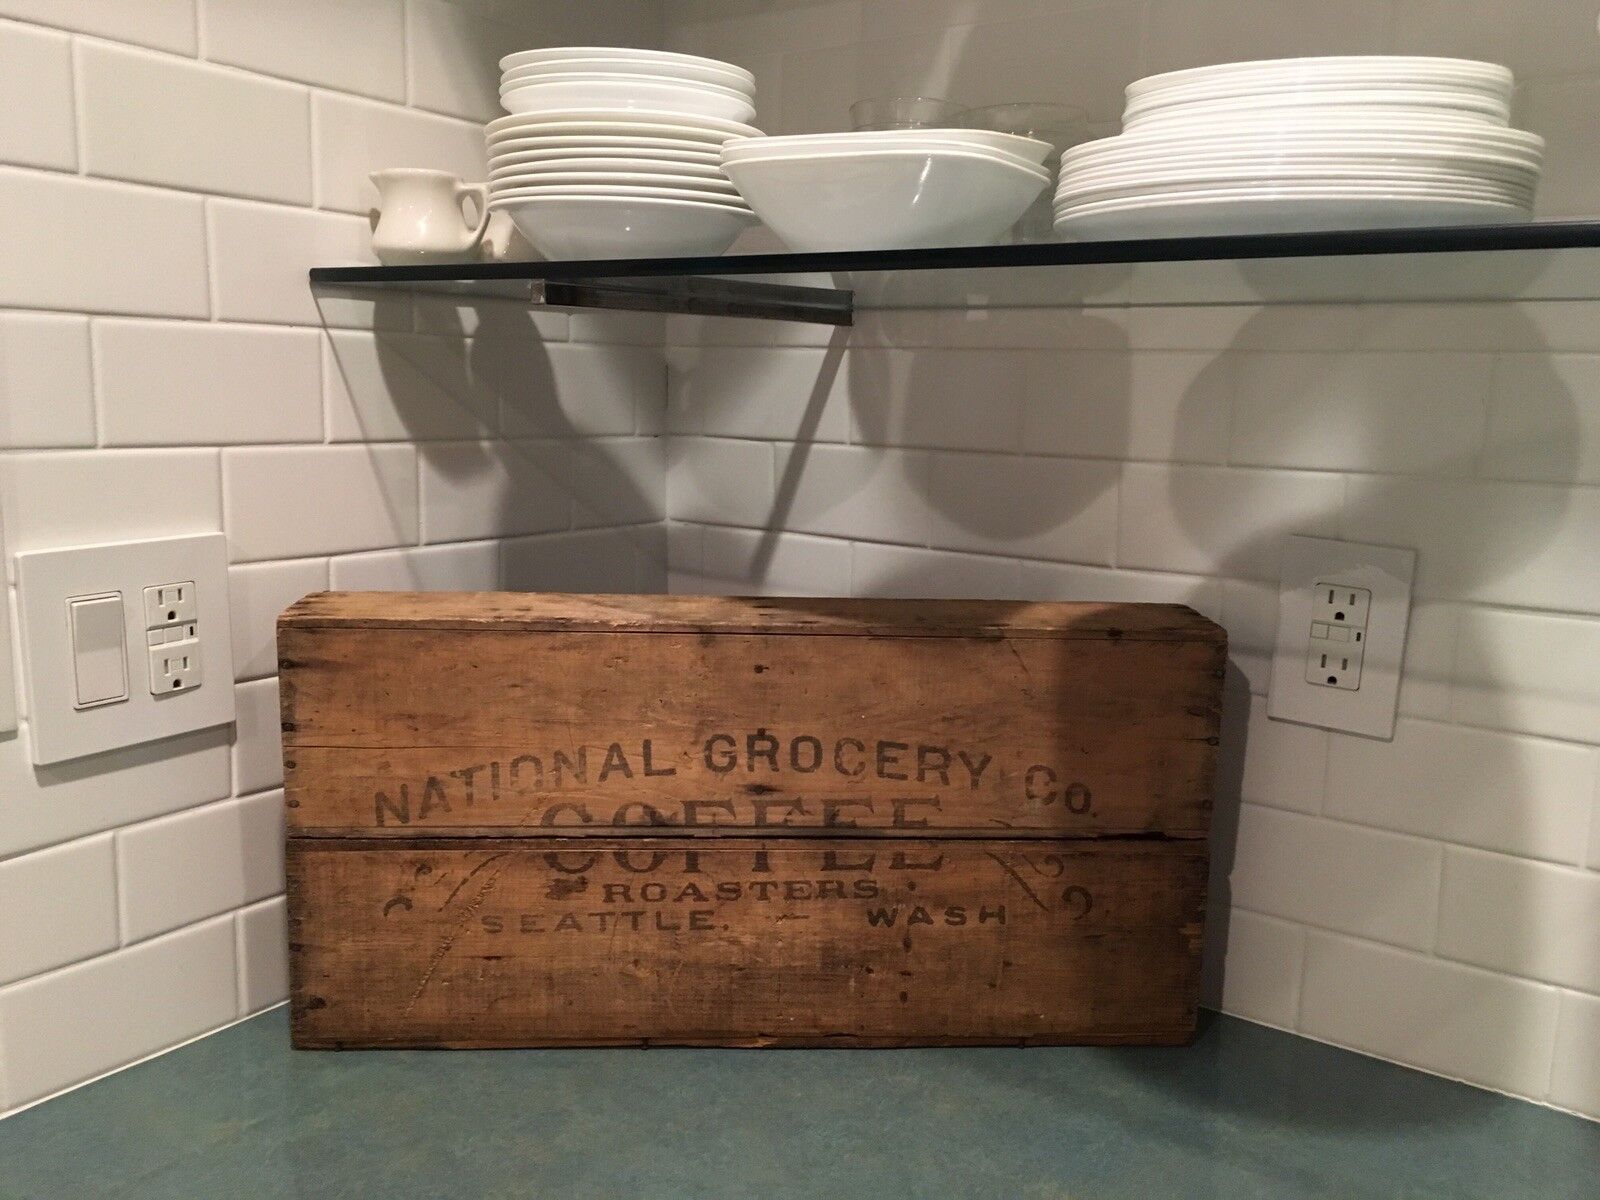 National Grocery Co Coffee roasters Seattle WA Crate early 1900s wood mercantile